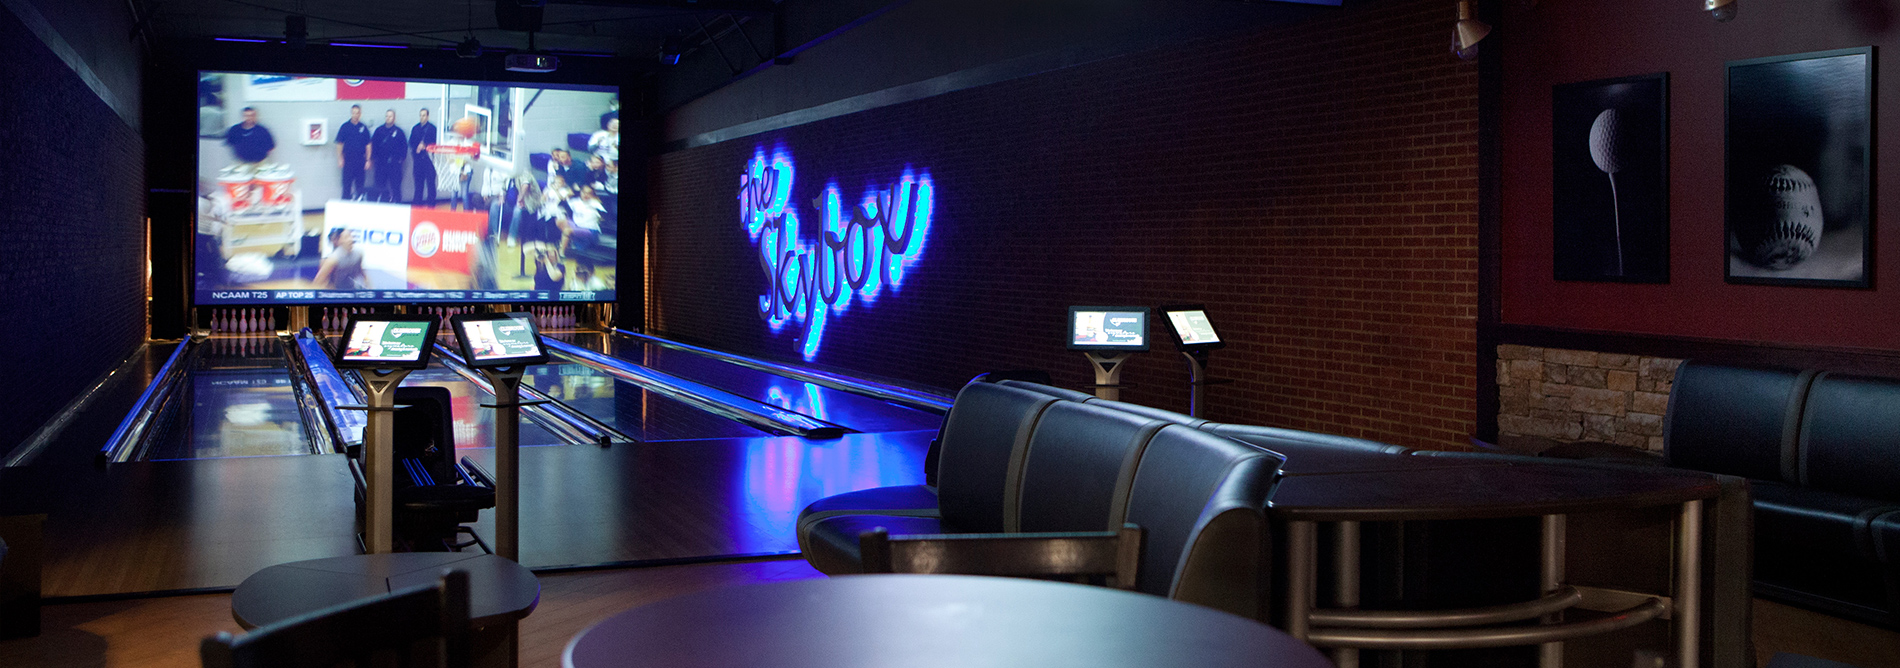 QUBICAAMF-bowling-Family-Entertainment-Center-The-Clubhouse-banner.jpg